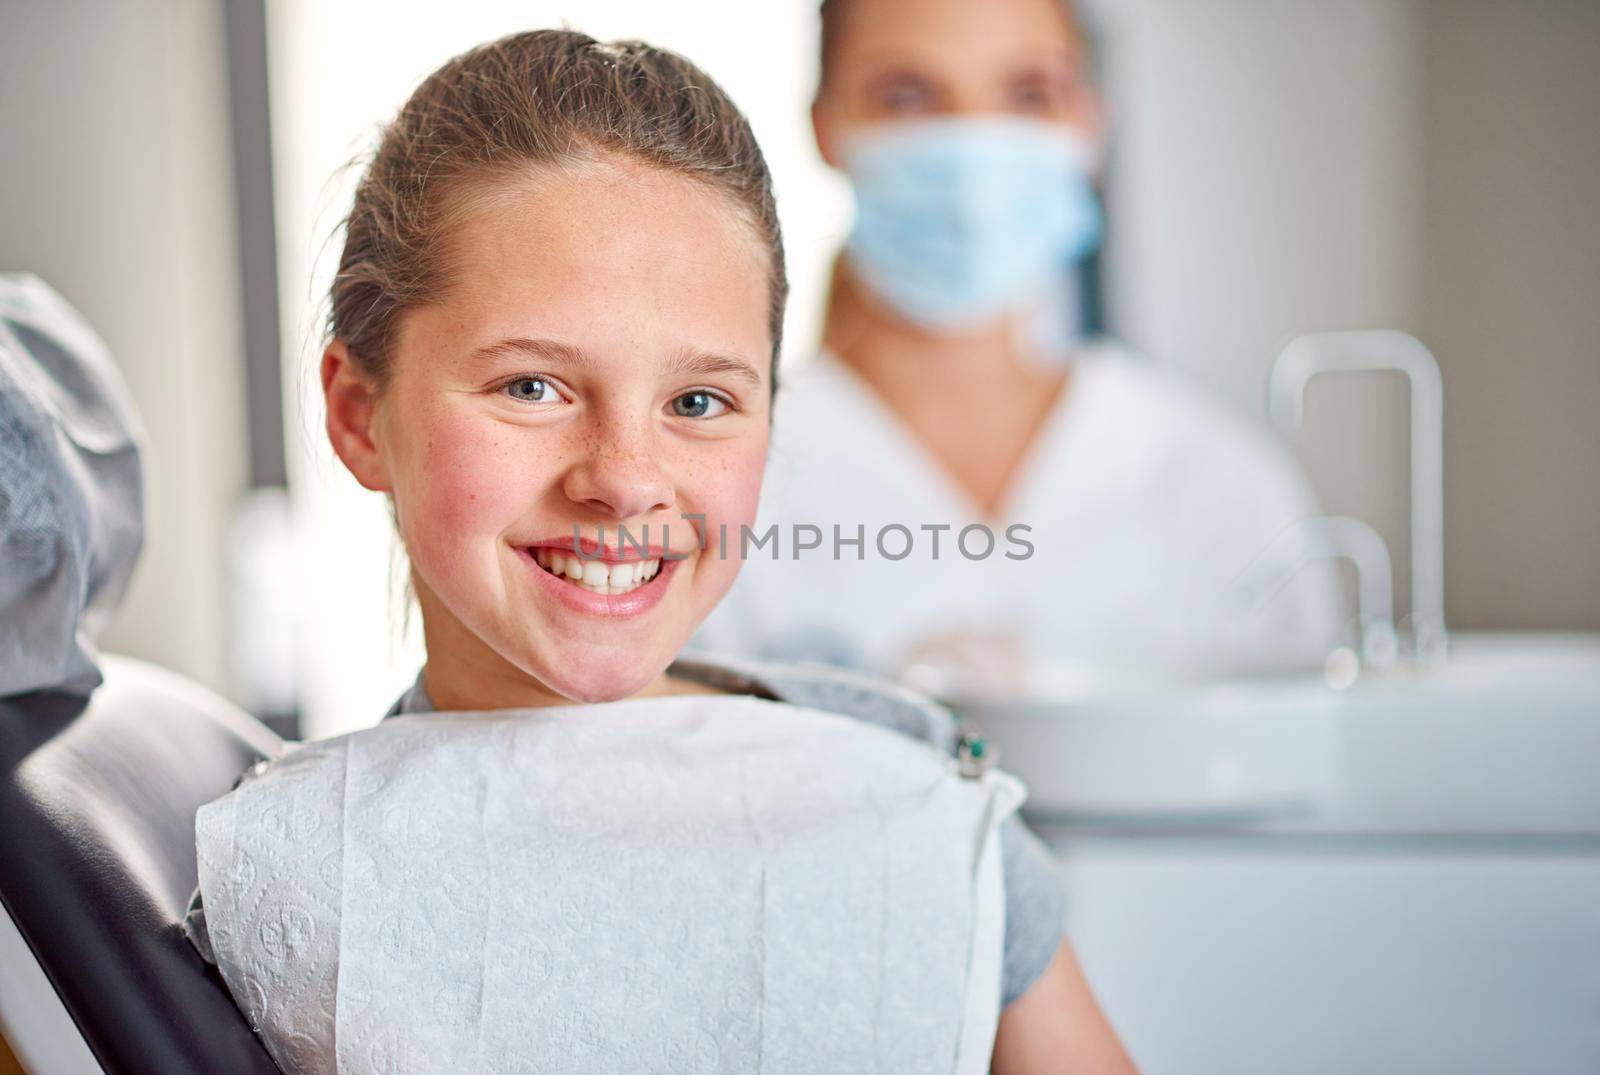 Shes got nothing to worry about. A young girl sitting in a dental chair with her dentist in the background